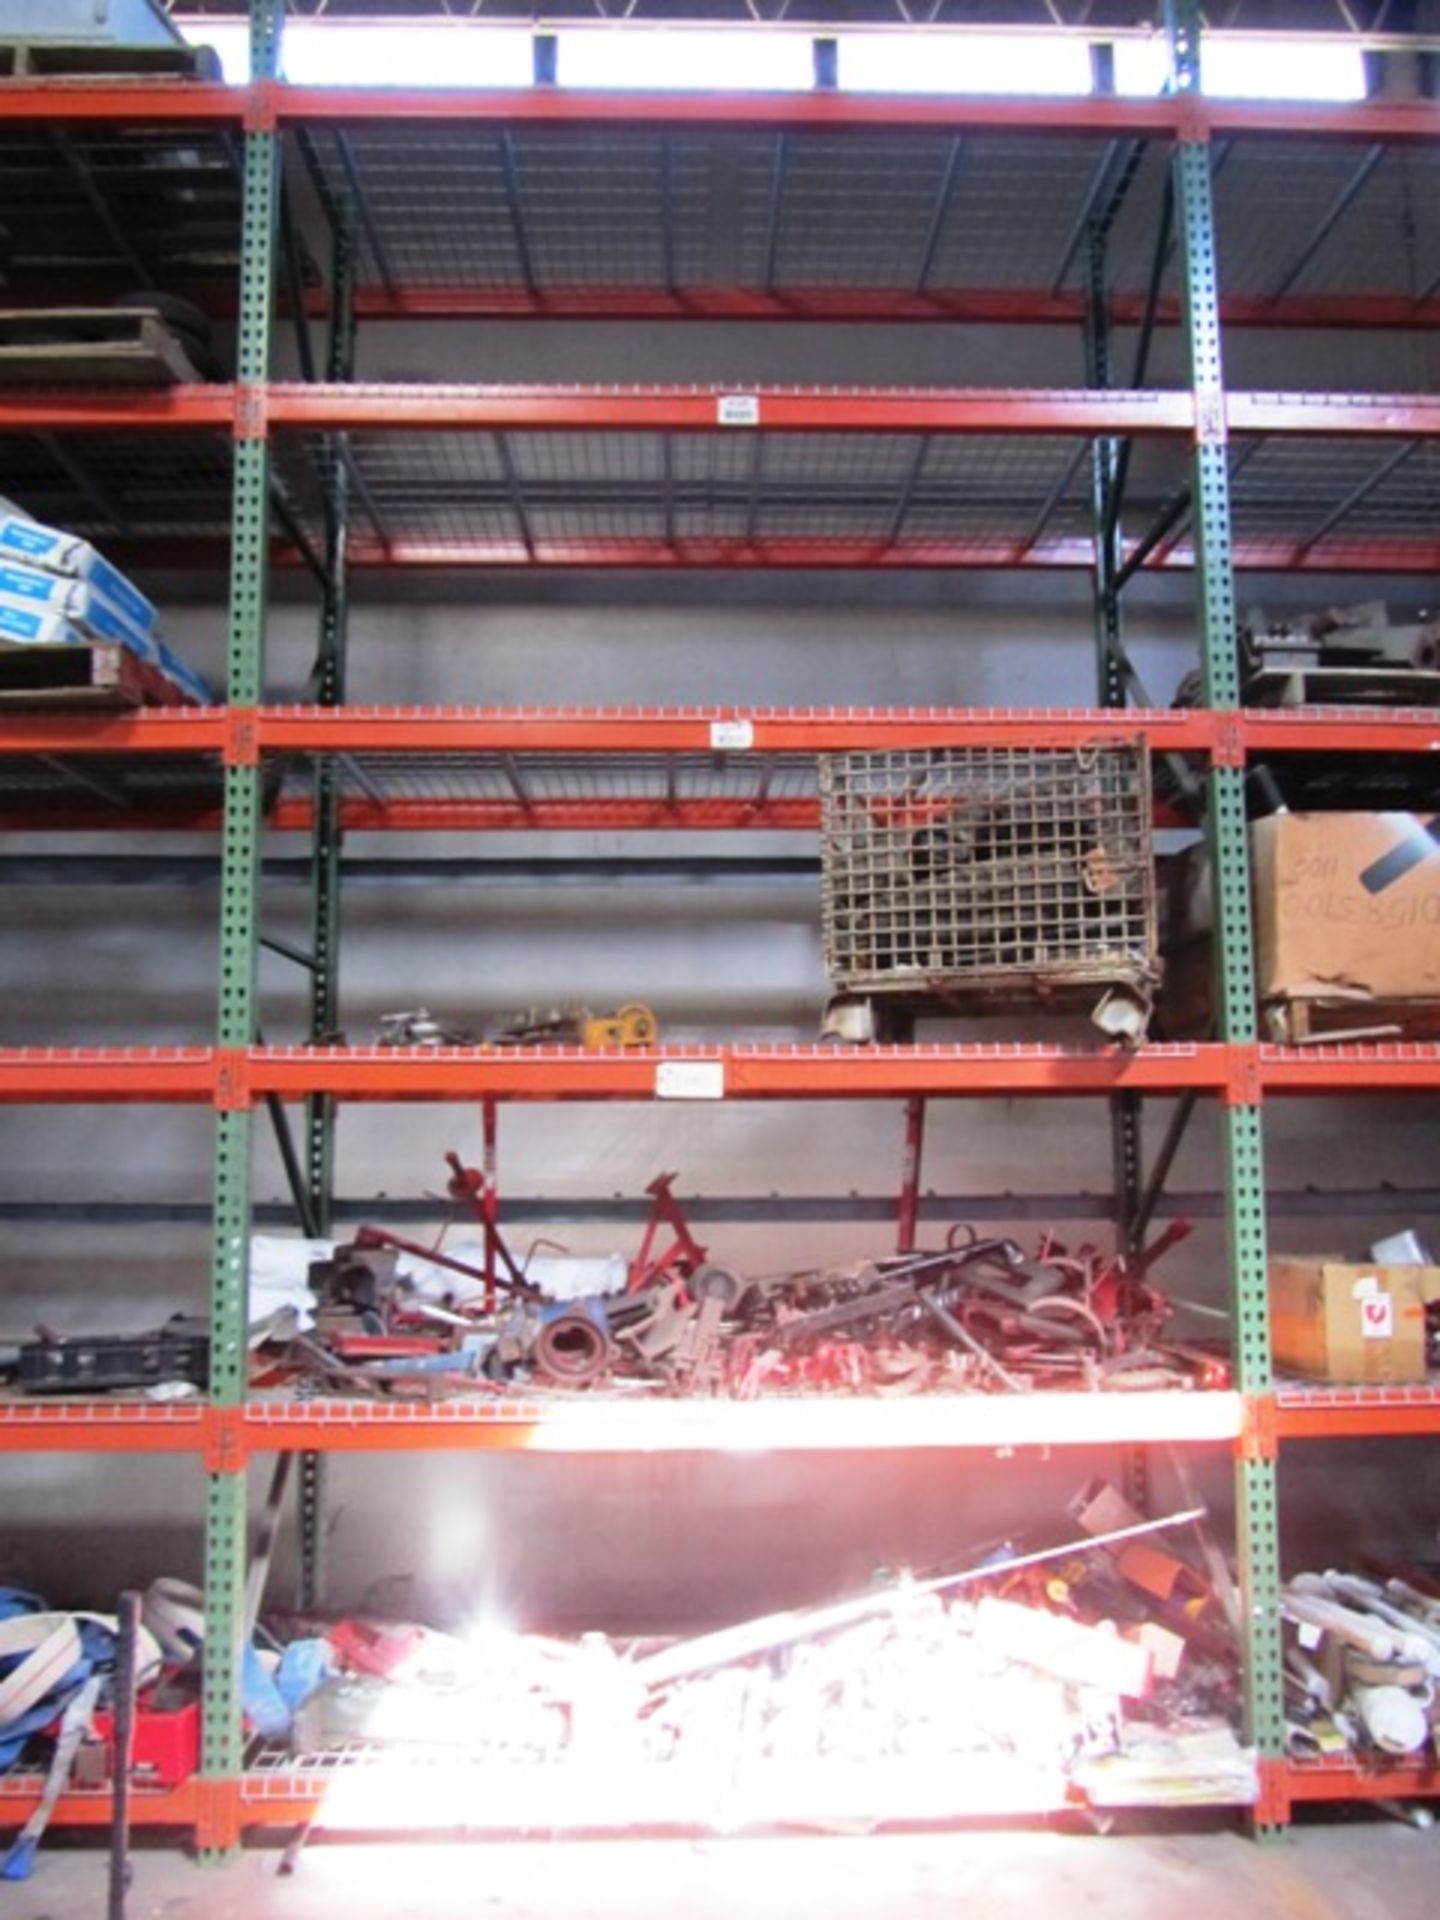 Contents of 3 Vertical Sections Pallet Racking consisting of Hydraulic Jacks (may need repair),